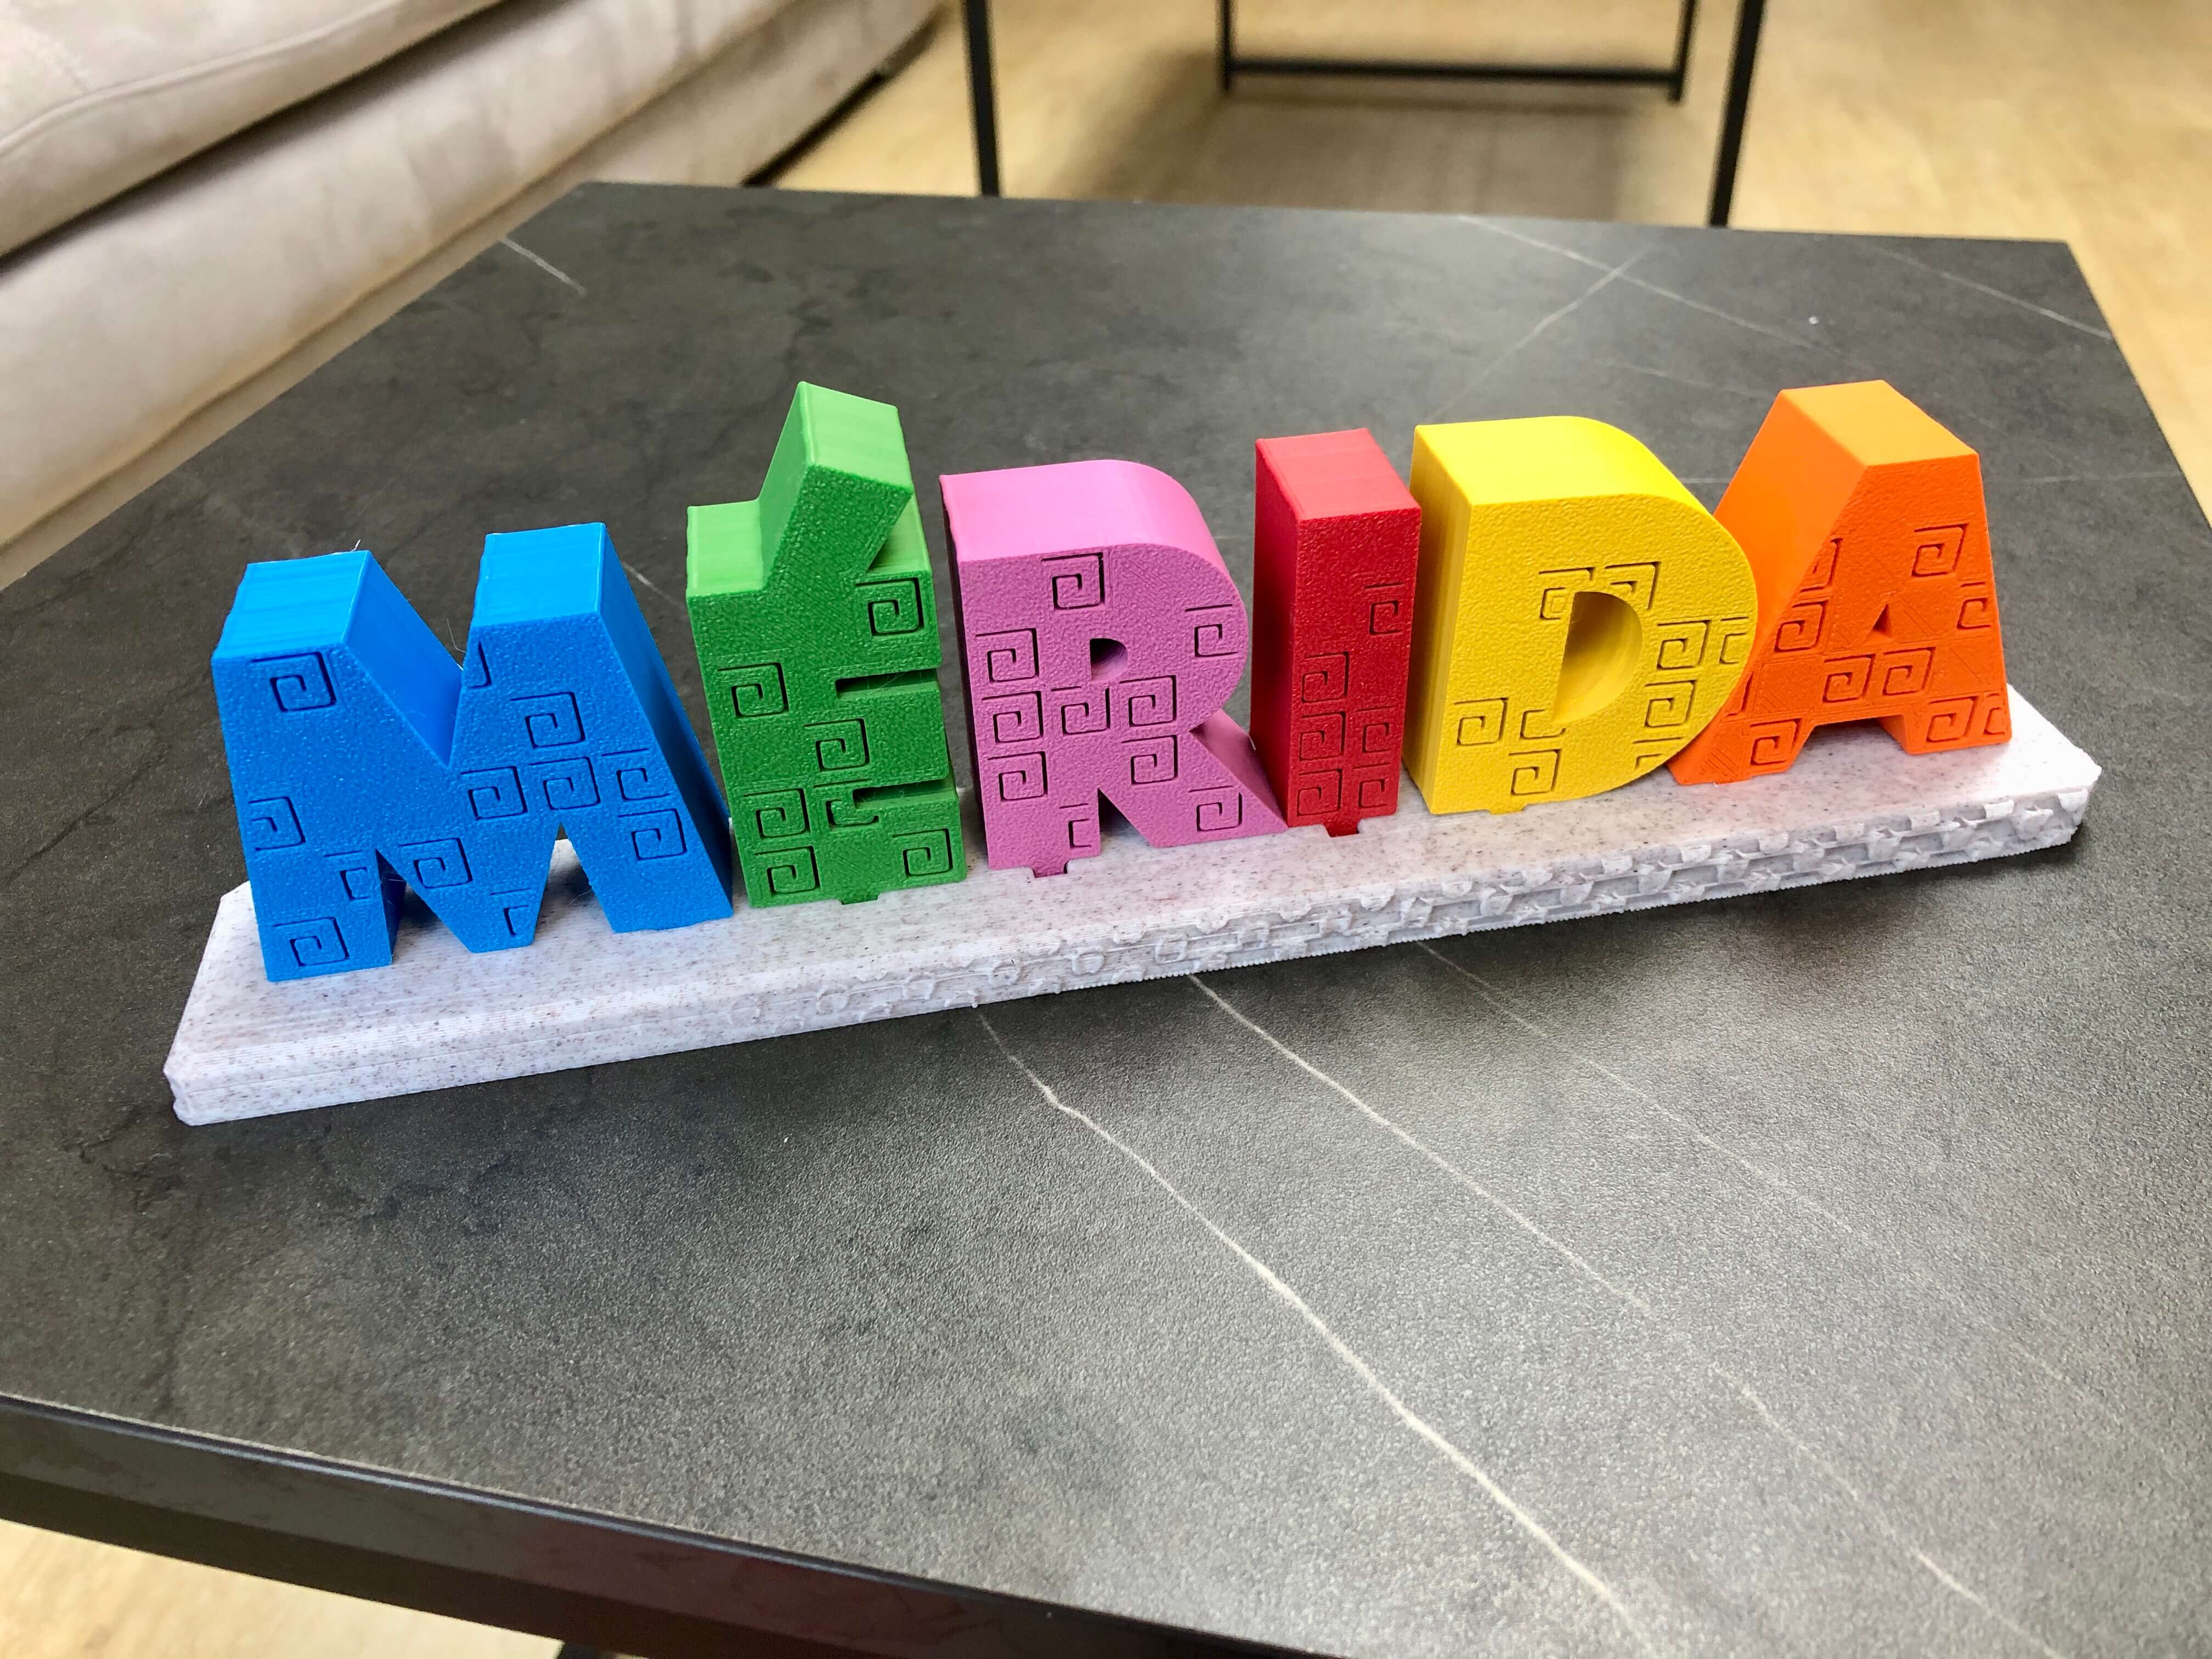 MERIDA letters in Yucatan by Dany Sánchez | Download free STL 